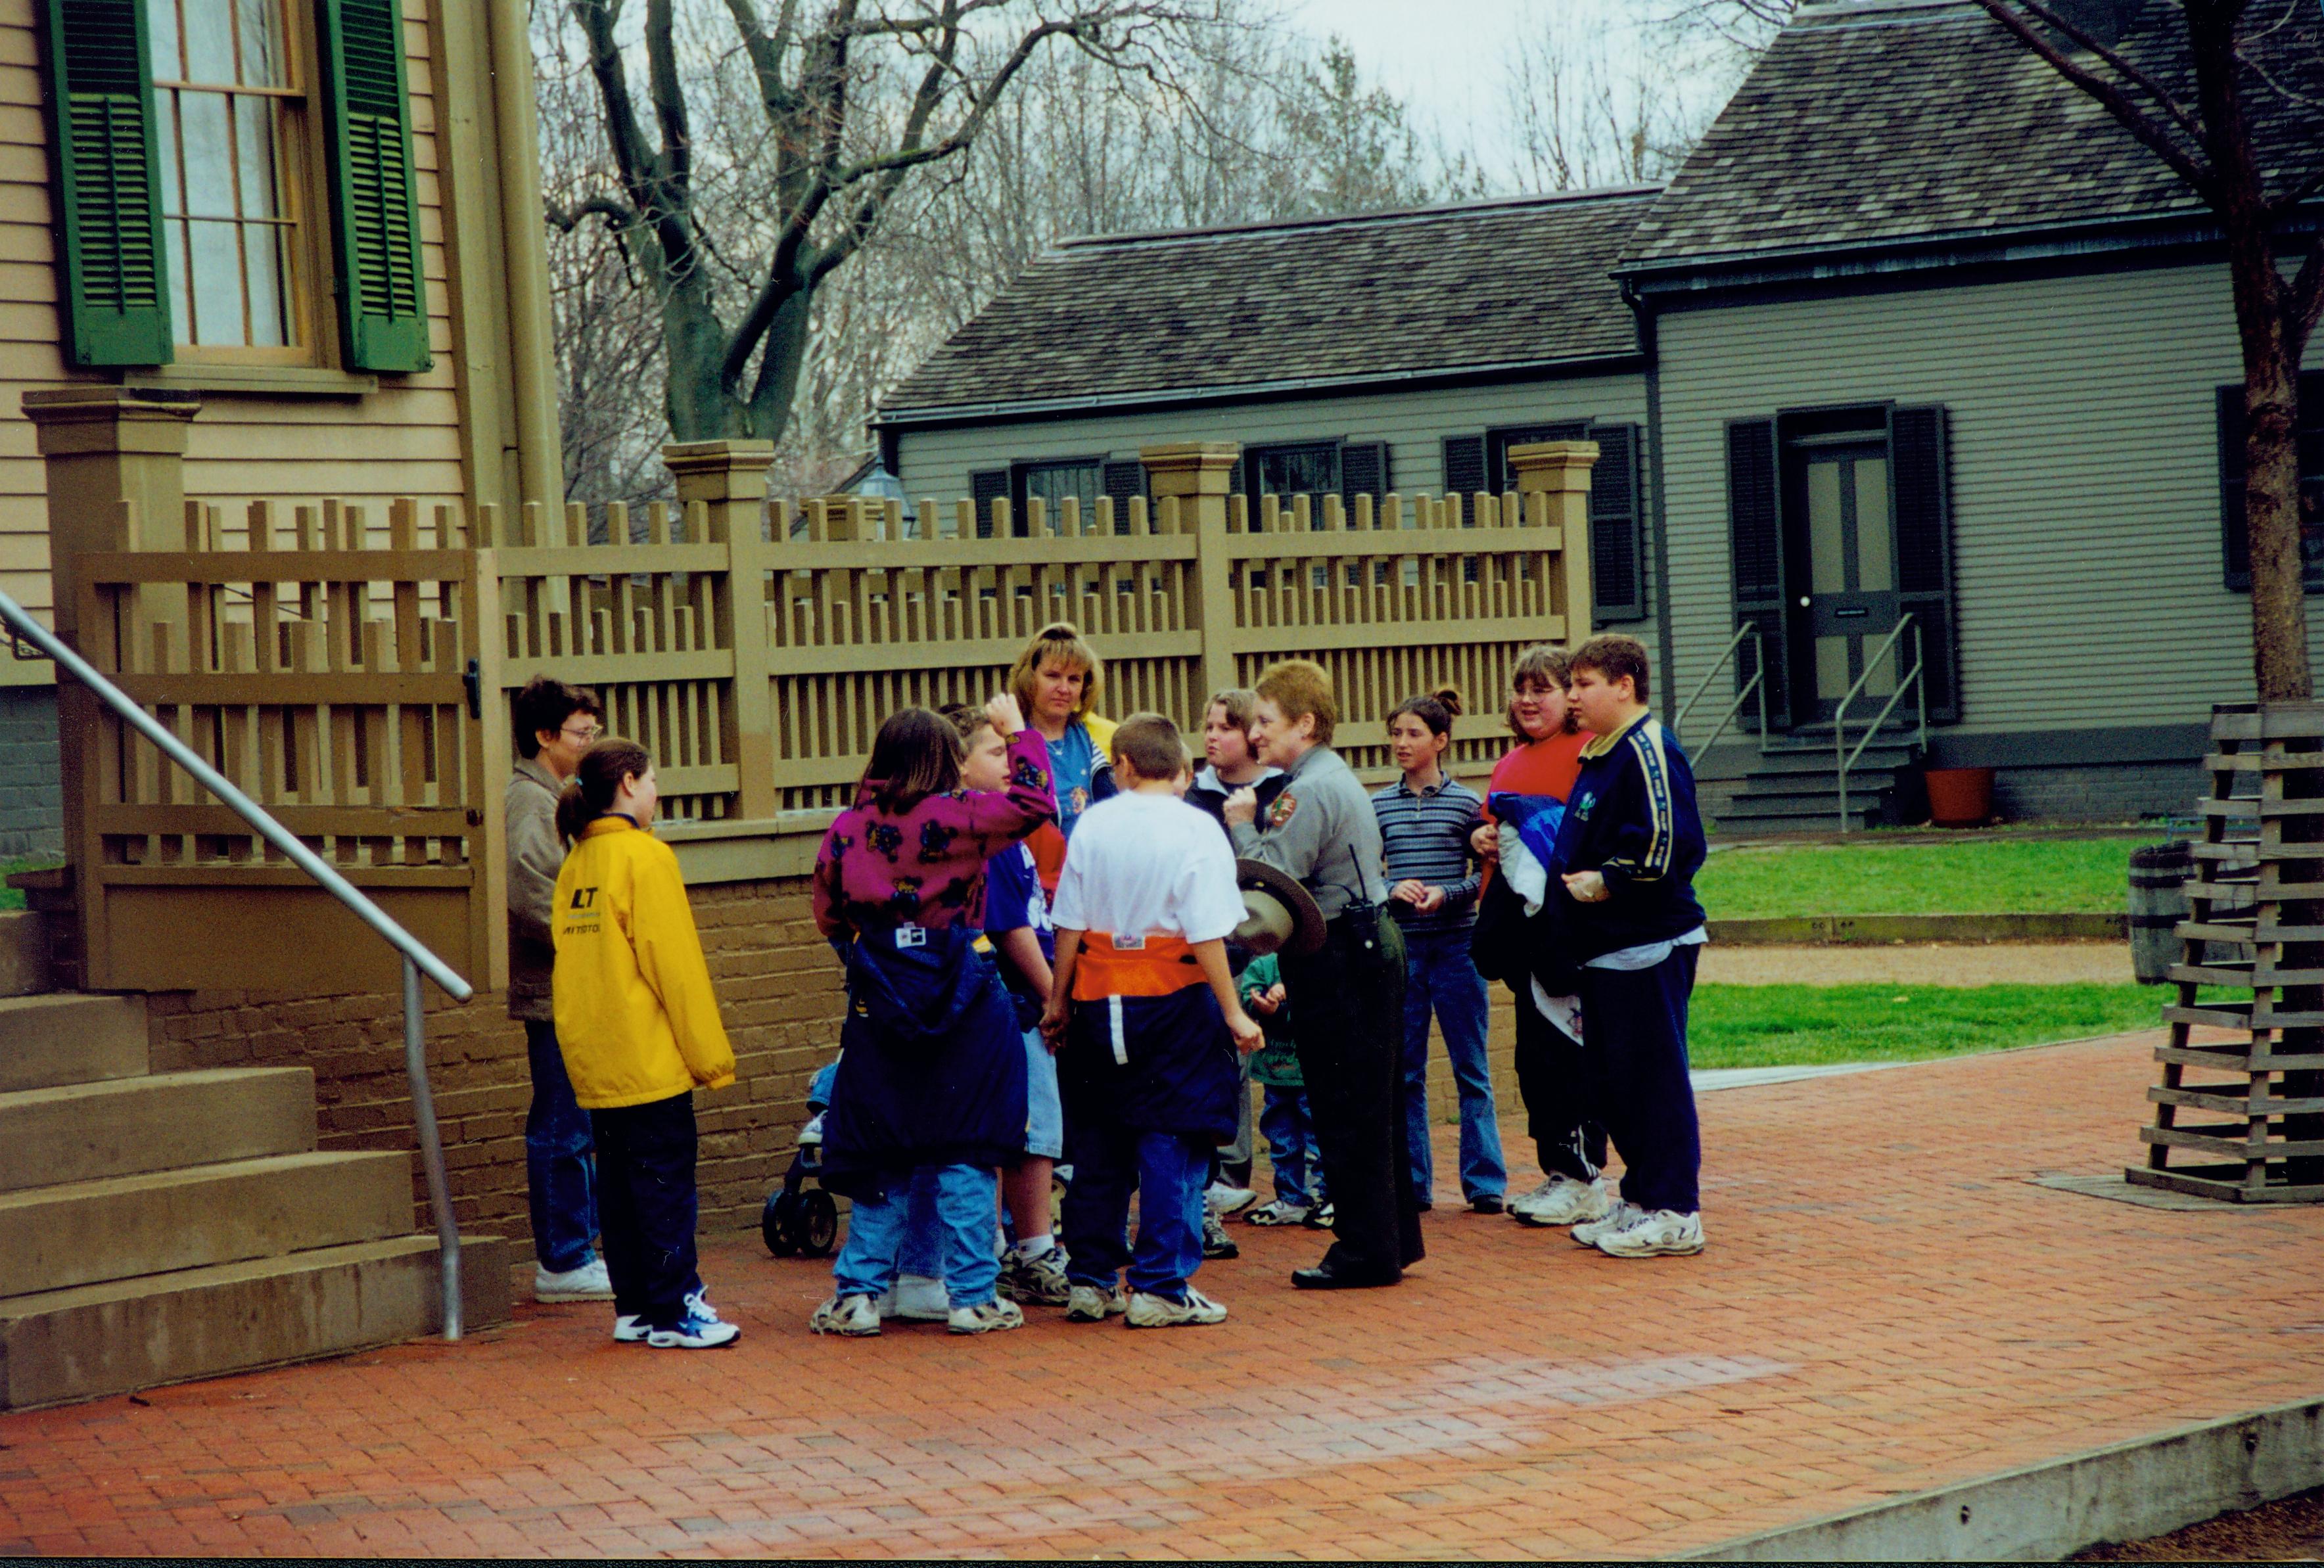 Interpreter Judy Winkelmann speaks with a small group of students in front of the Lincoln Home. The restored Arnold house appears in the background. Photographer facing south east.